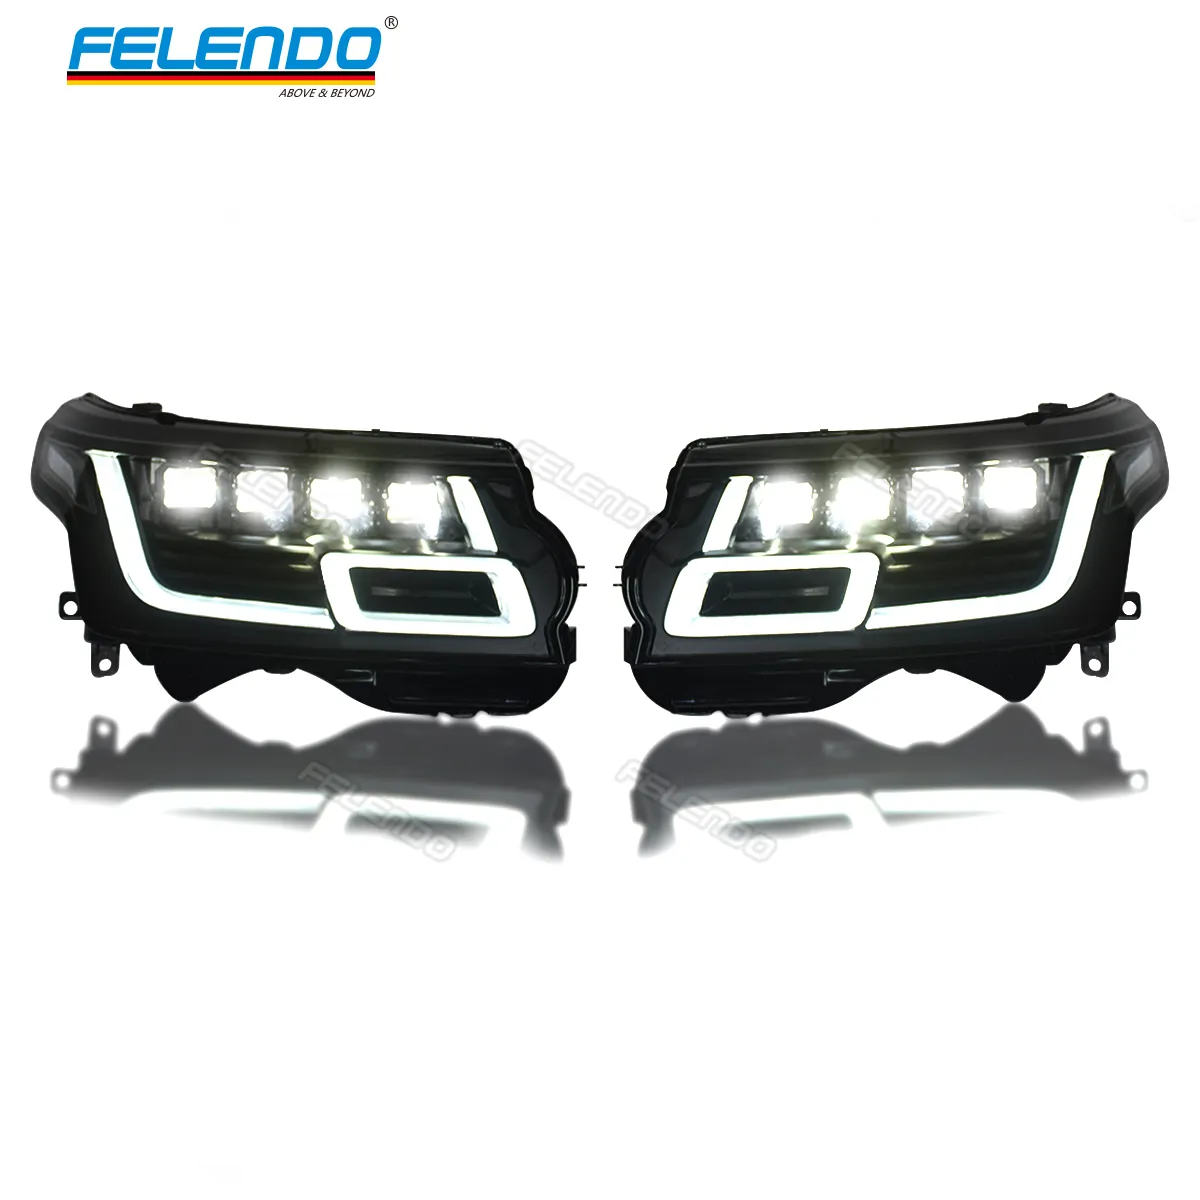 FELENDO 2022 style Vogue L405 Upgrade Headlight without Changing Bumper Body Modification Vogue 13-17 Plug&Play LED Headlight